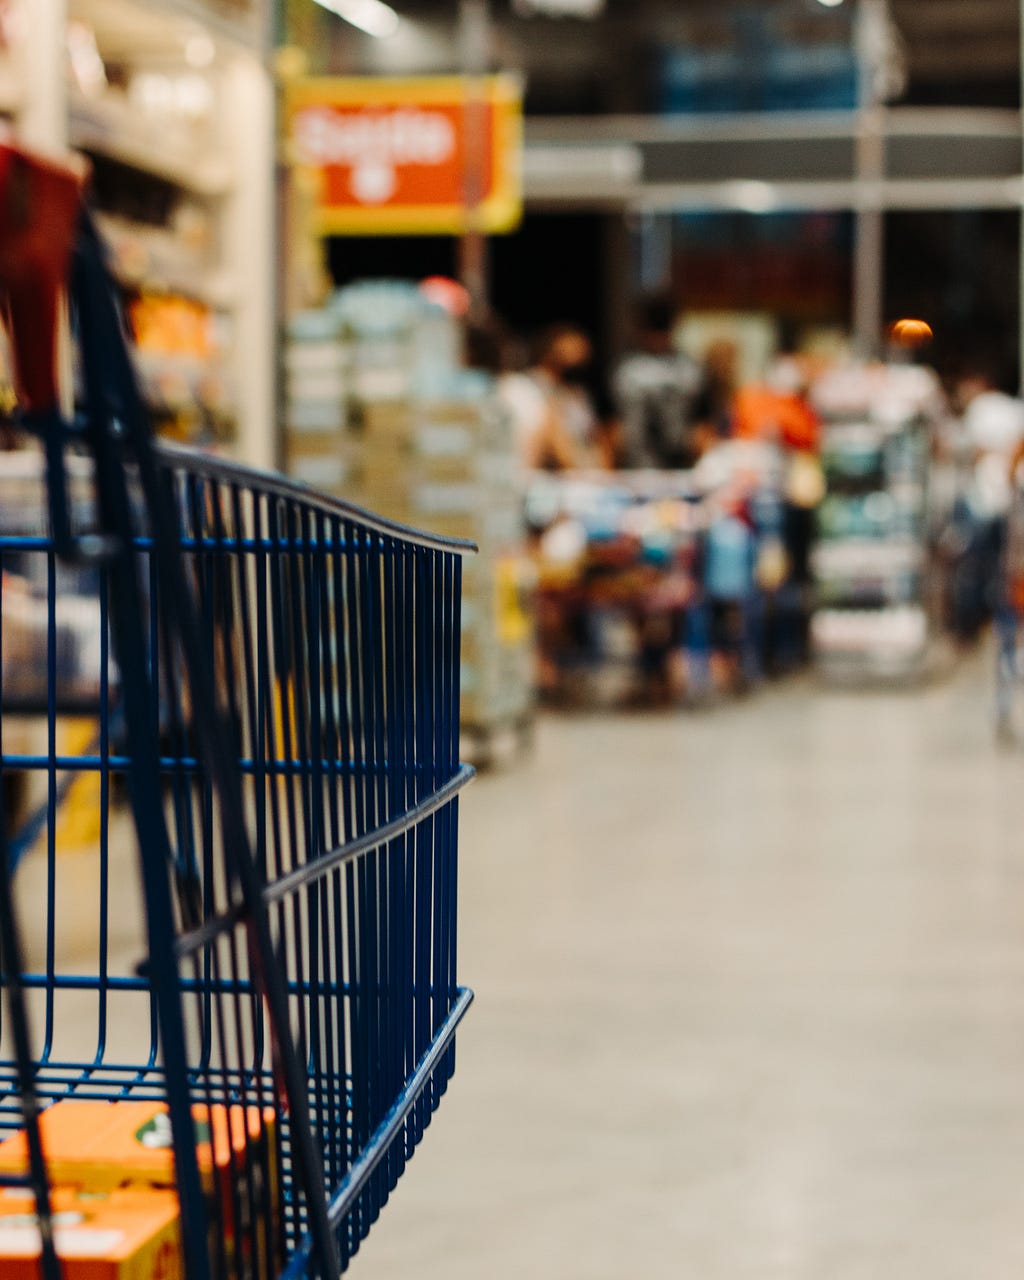 Closeup view of a grocery cart, with the blurred interior of a grocery store in the background.